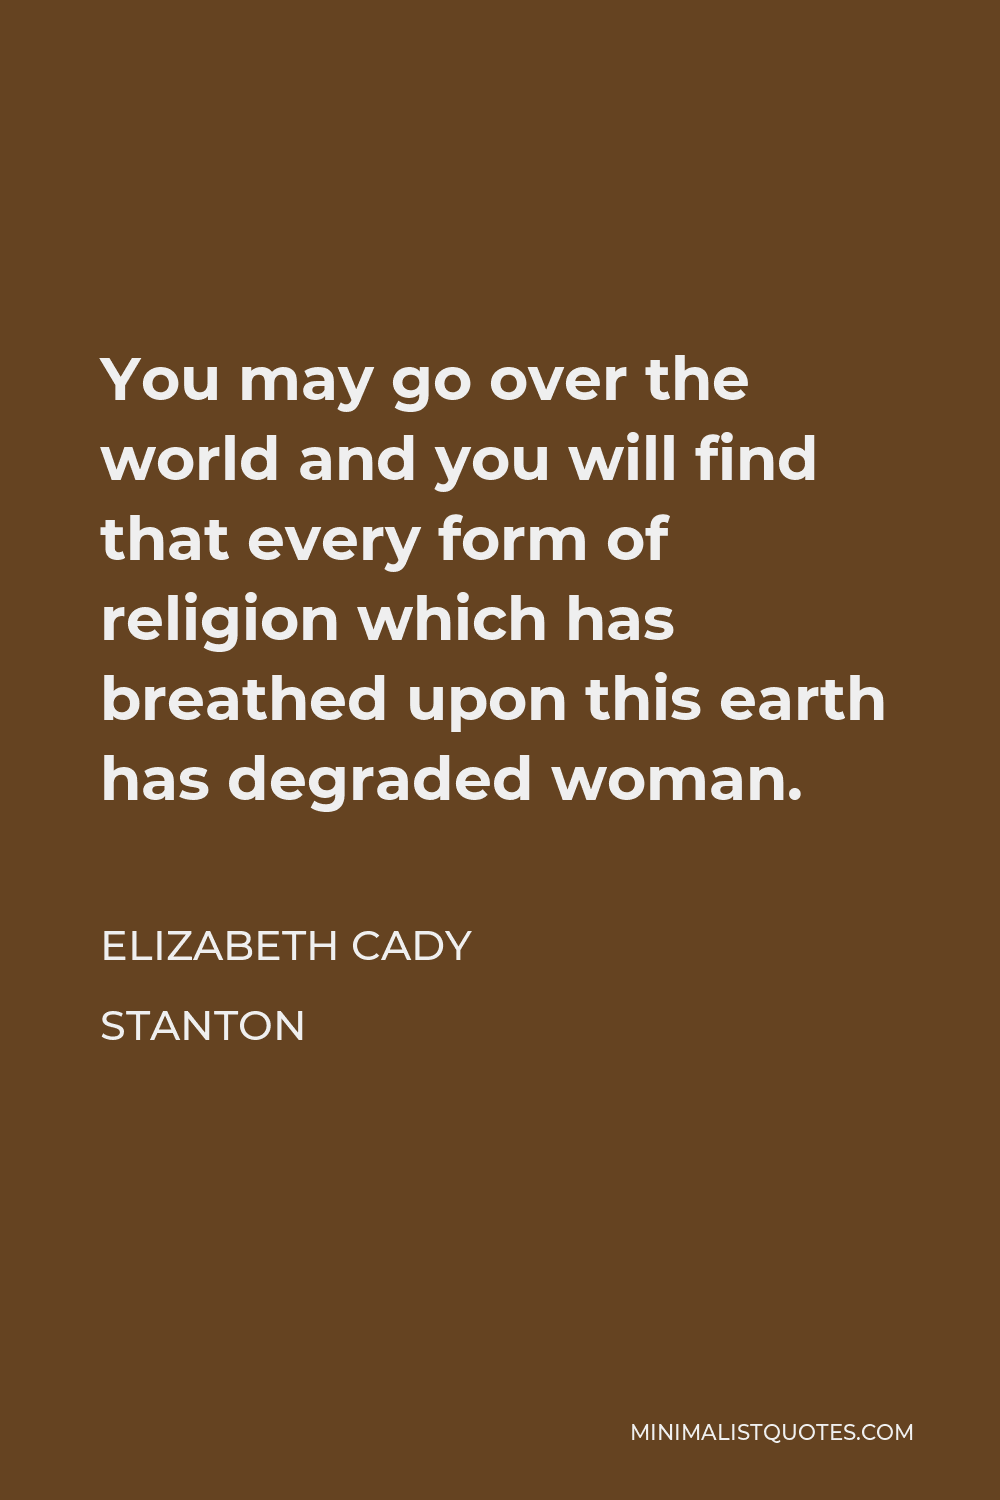 Elizabeth Cady Stanton Quote - You may go over the world and you will find that every form of religion which has breathed upon this earth has degraded woman.